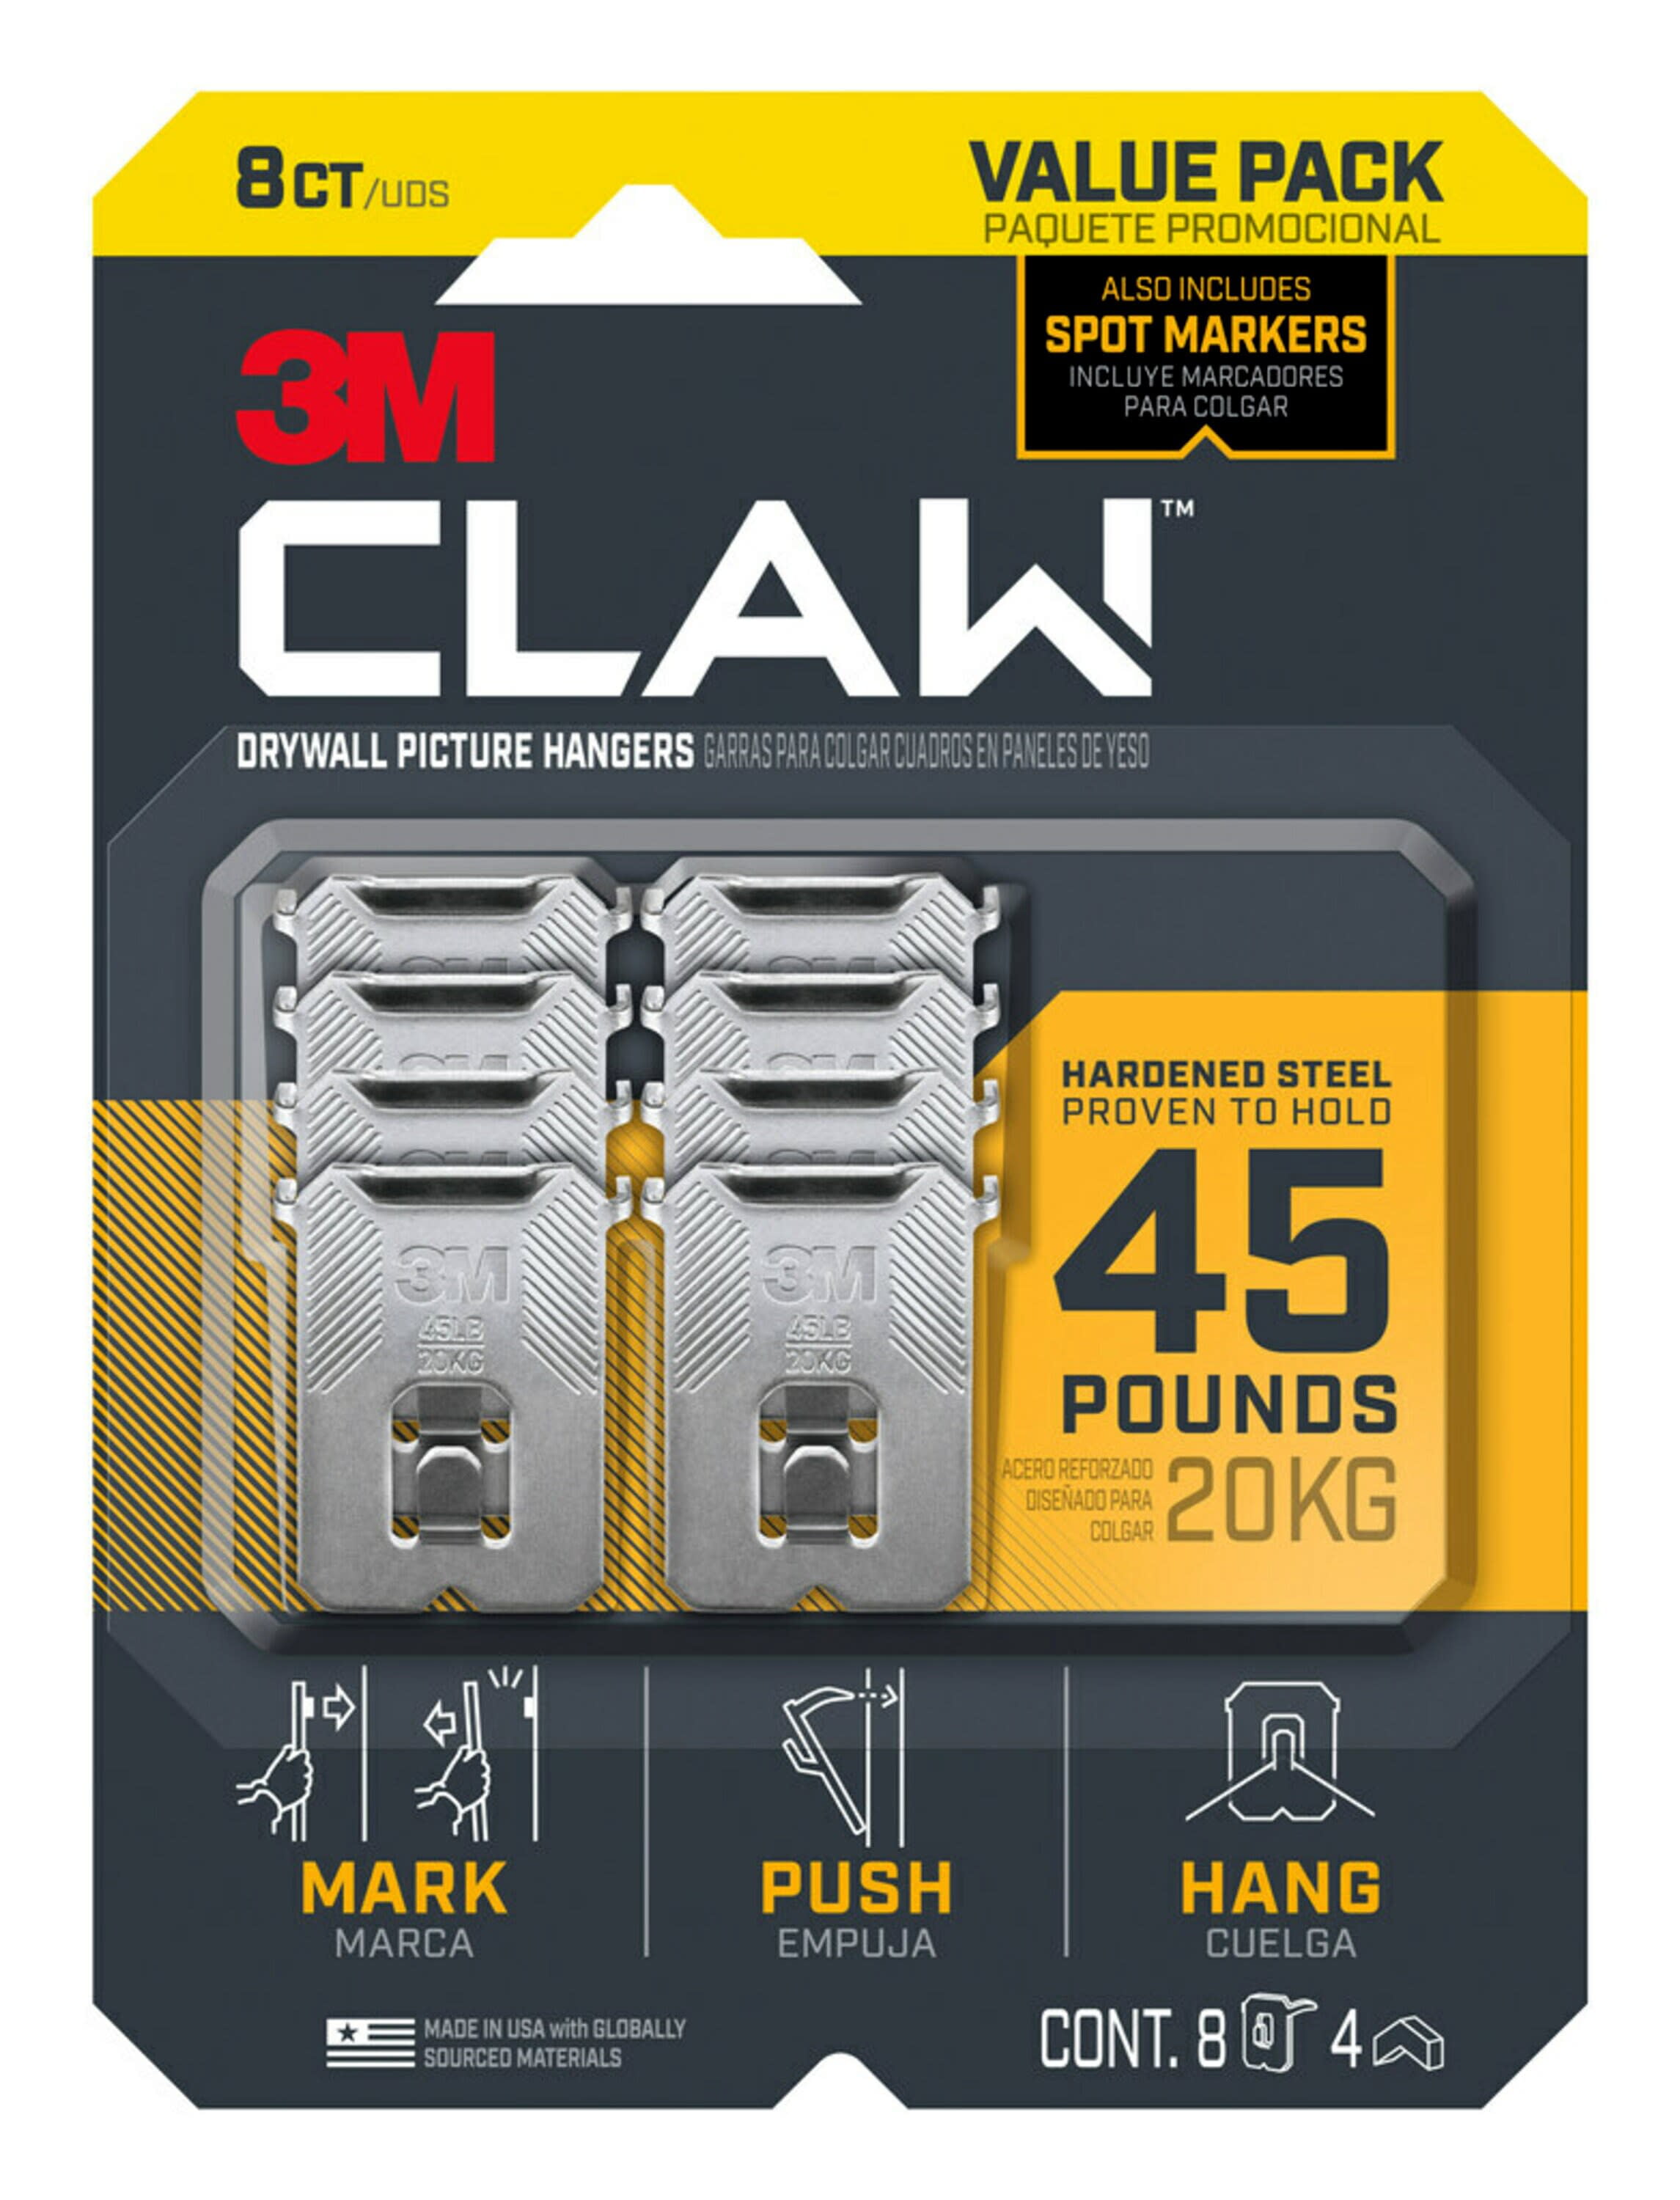 3M CLAW Drywall Picture Hanger with Temporary Spot Kuwait